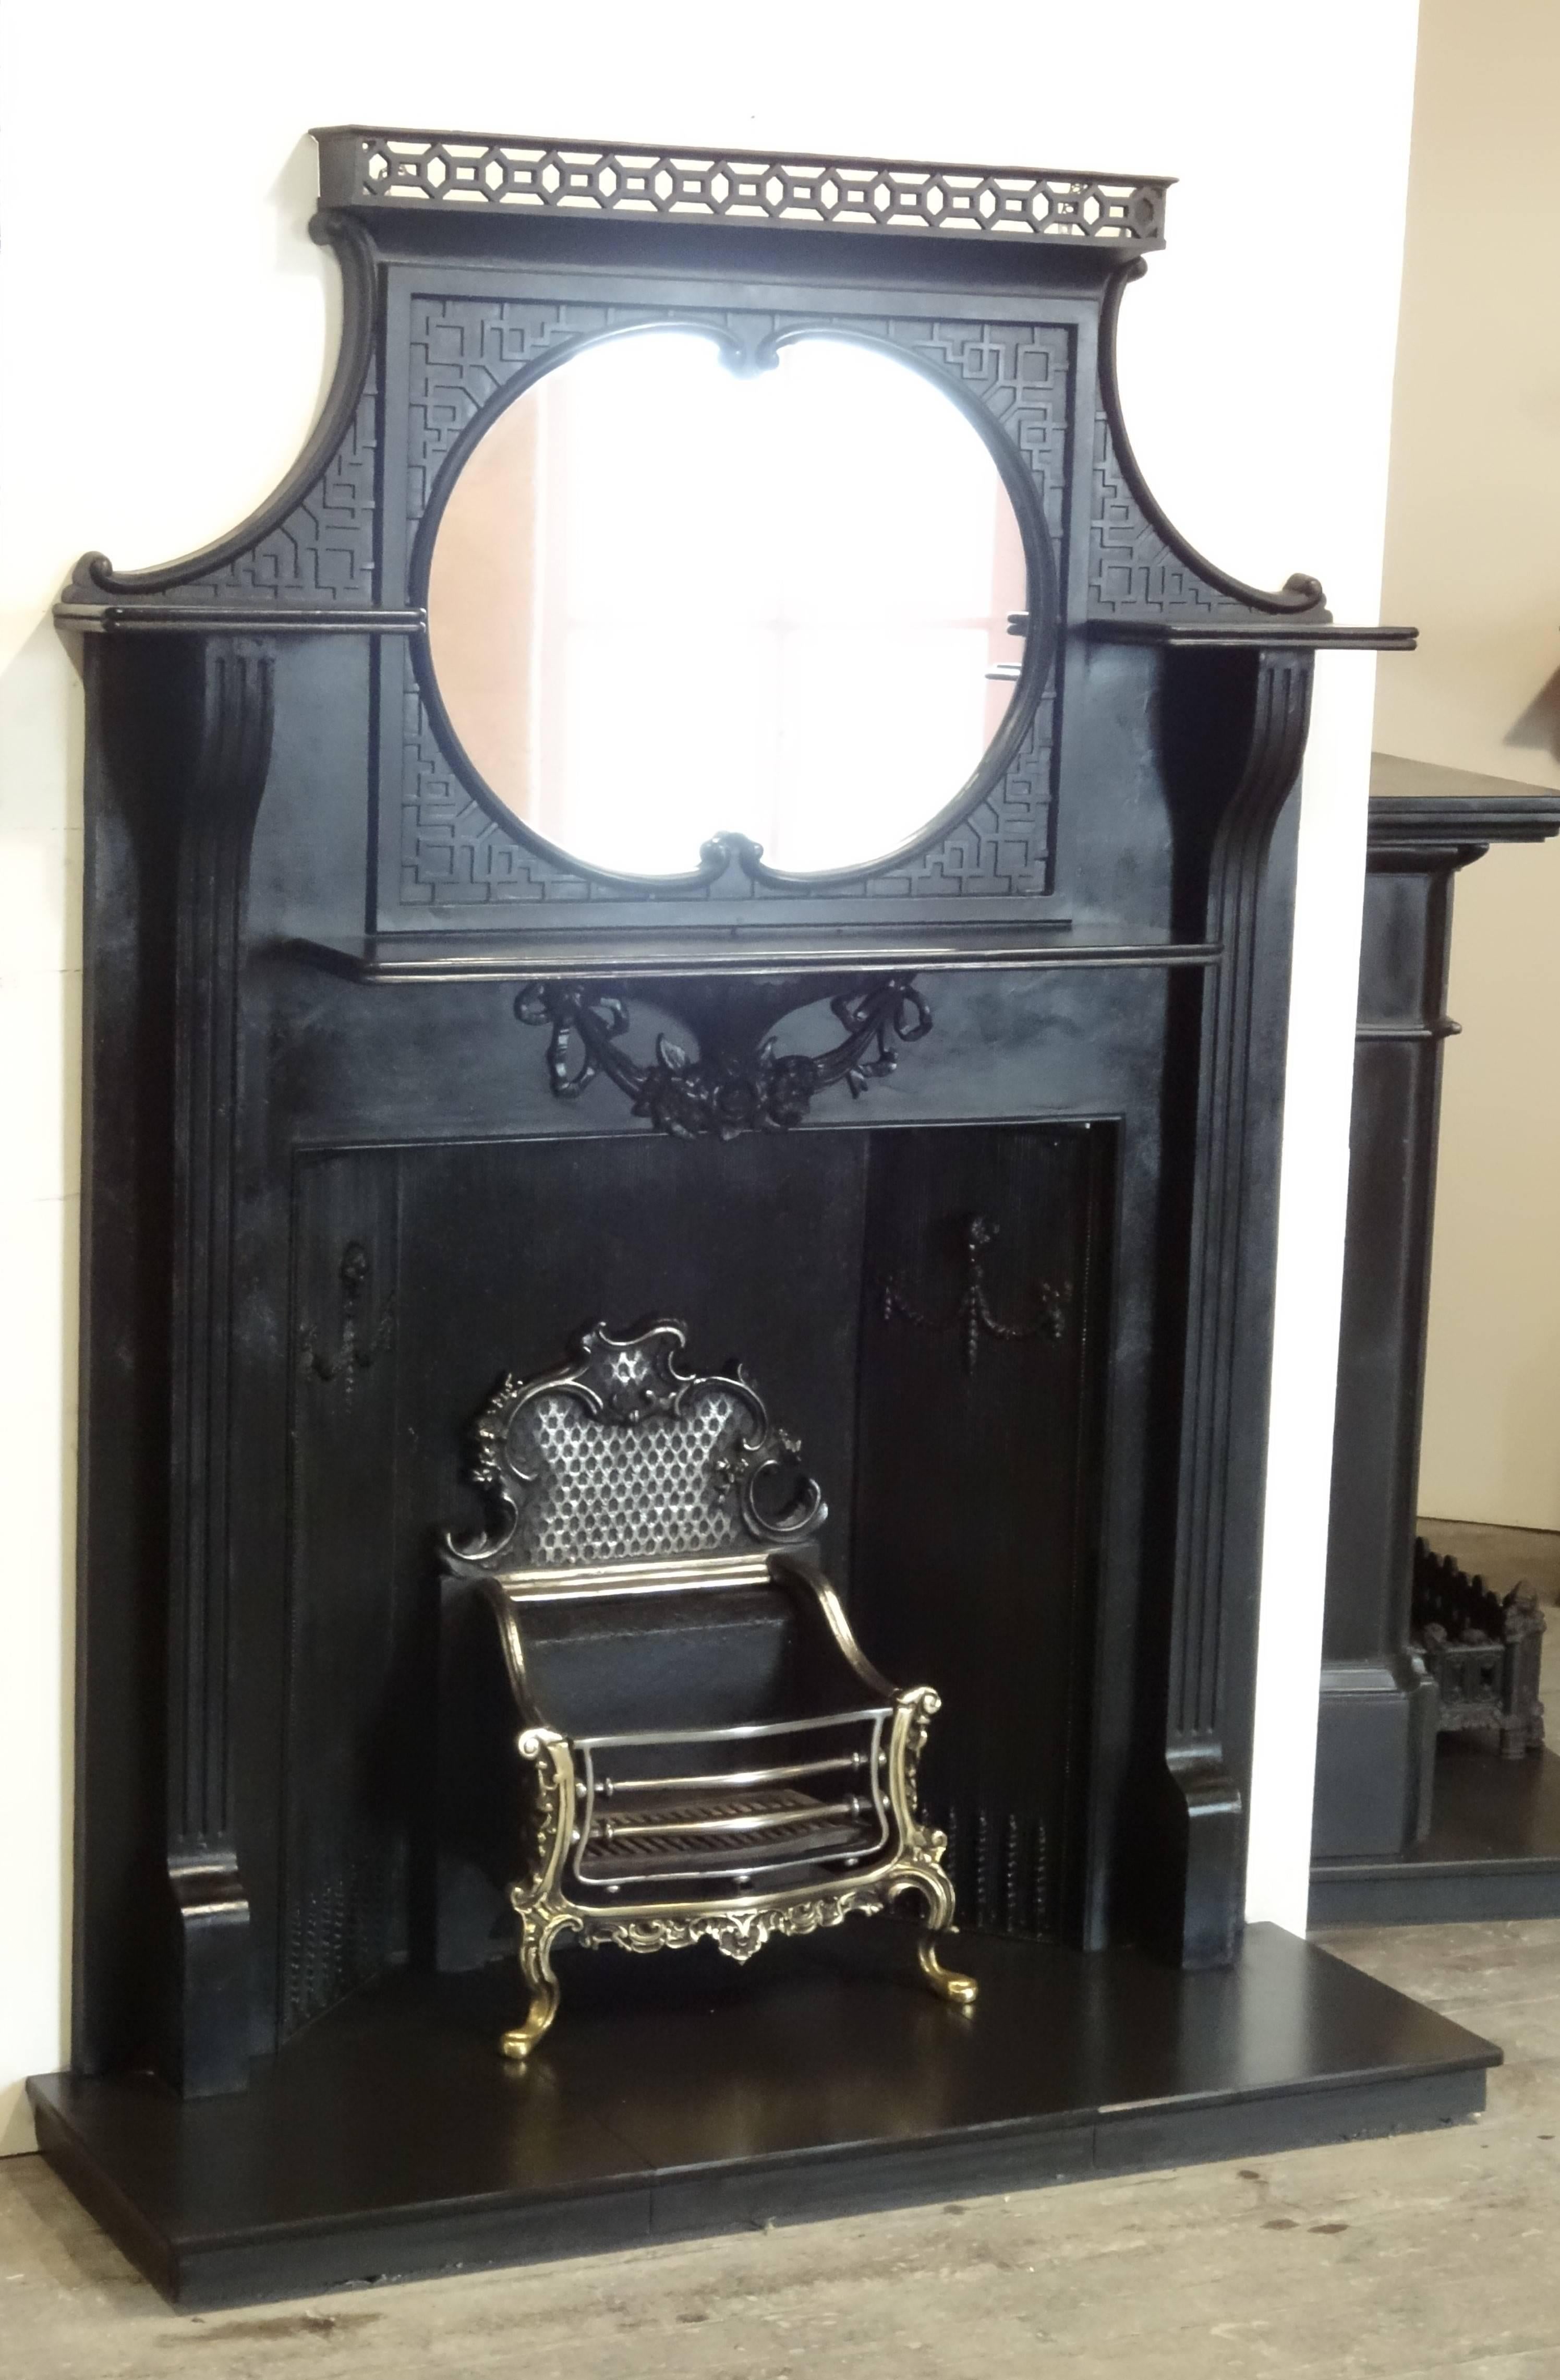 Early 20th Century Edwardian Cast Iron Fire Surround with Integral Overmantel In Good Condition For Sale In Lurgan, Northern Ireland